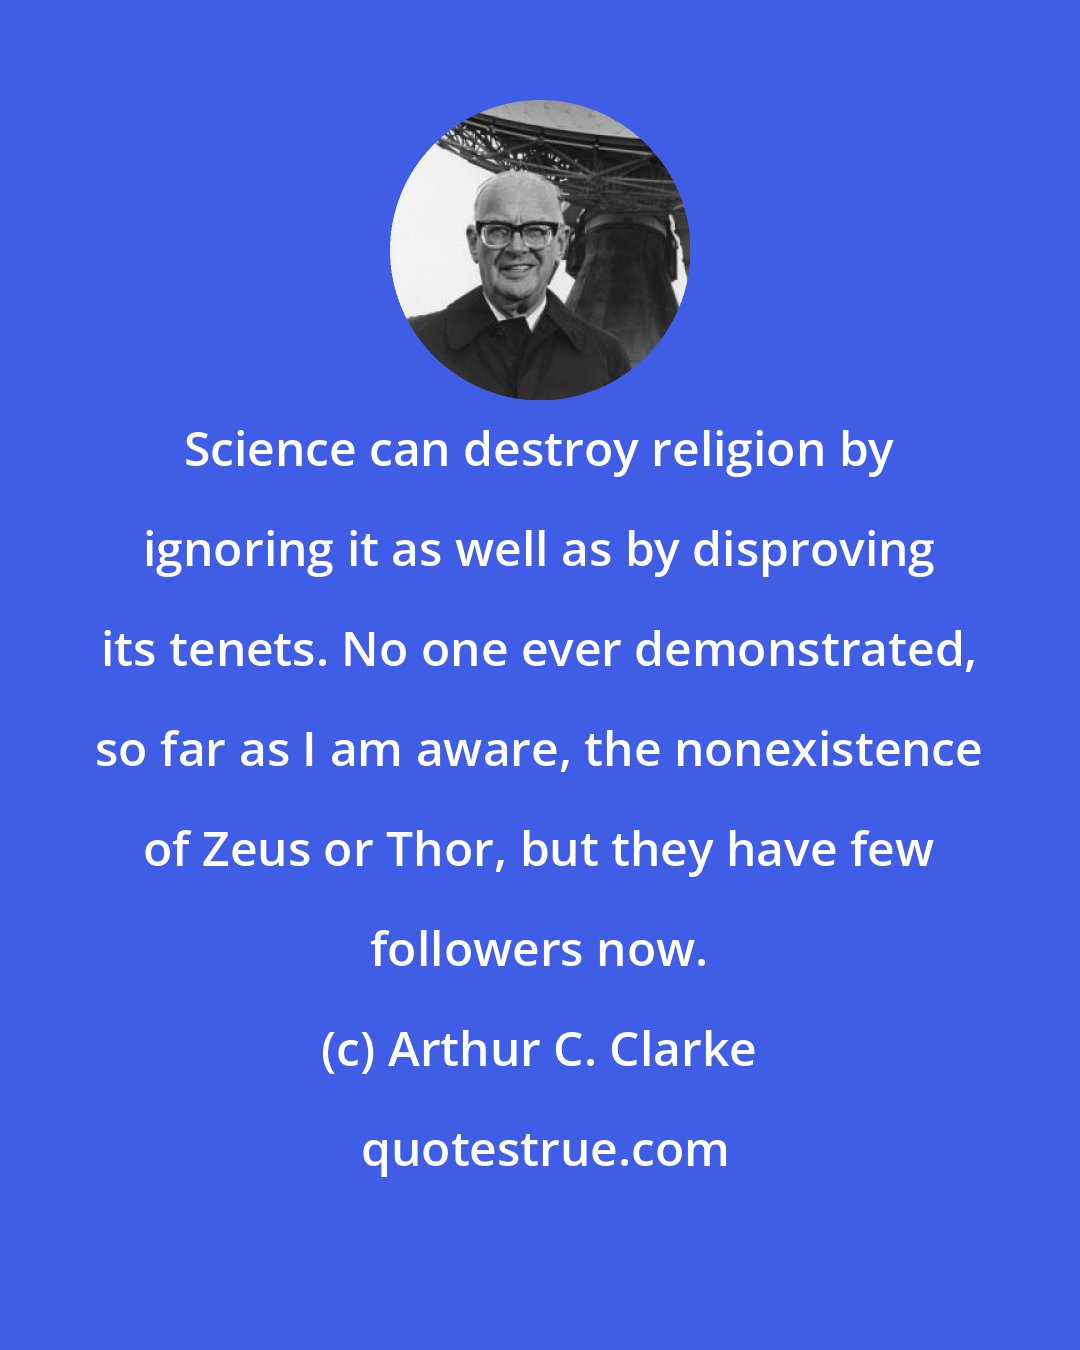 Arthur C. Clarke: Science can destroy religion by ignoring it as well as by disproving its tenets. No one ever demonstrated, so far as I am aware, the nonexistence of Zeus or Thor, but they have few followers now.